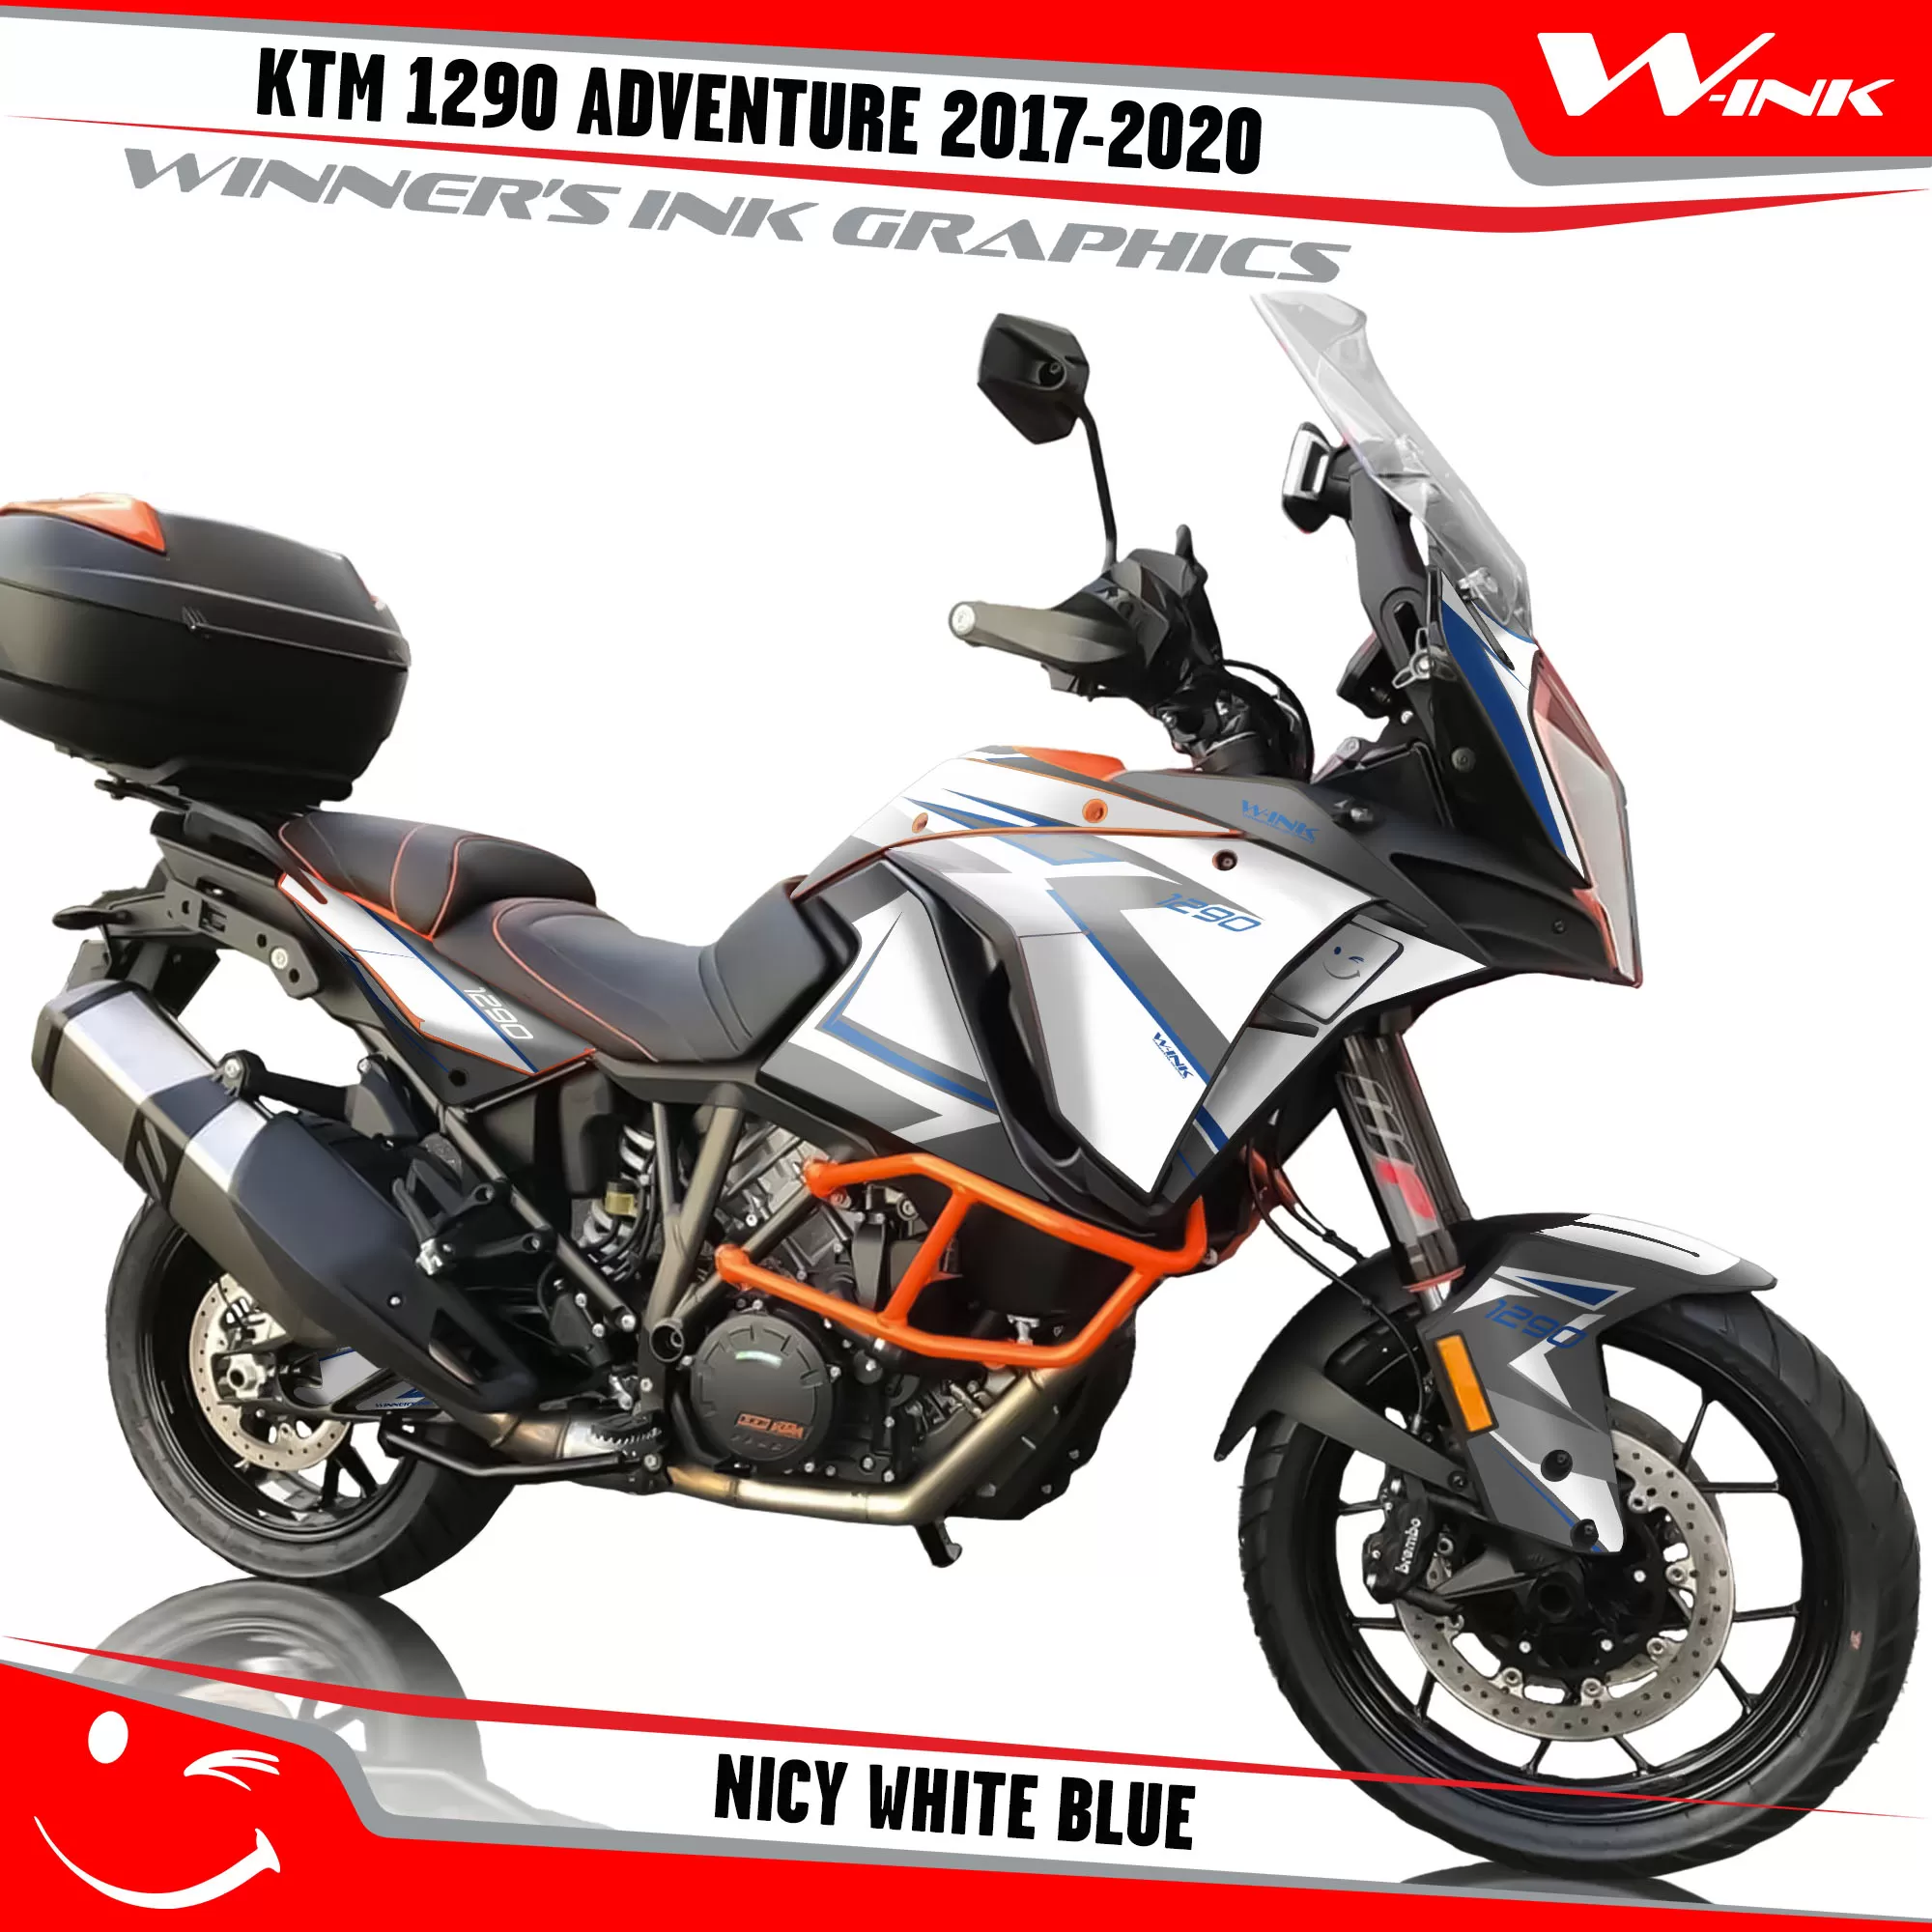 KTM-Adventure-1290-2017-2018-2019-2020-graphics-kit-and-decals-Nicy-White-Blue